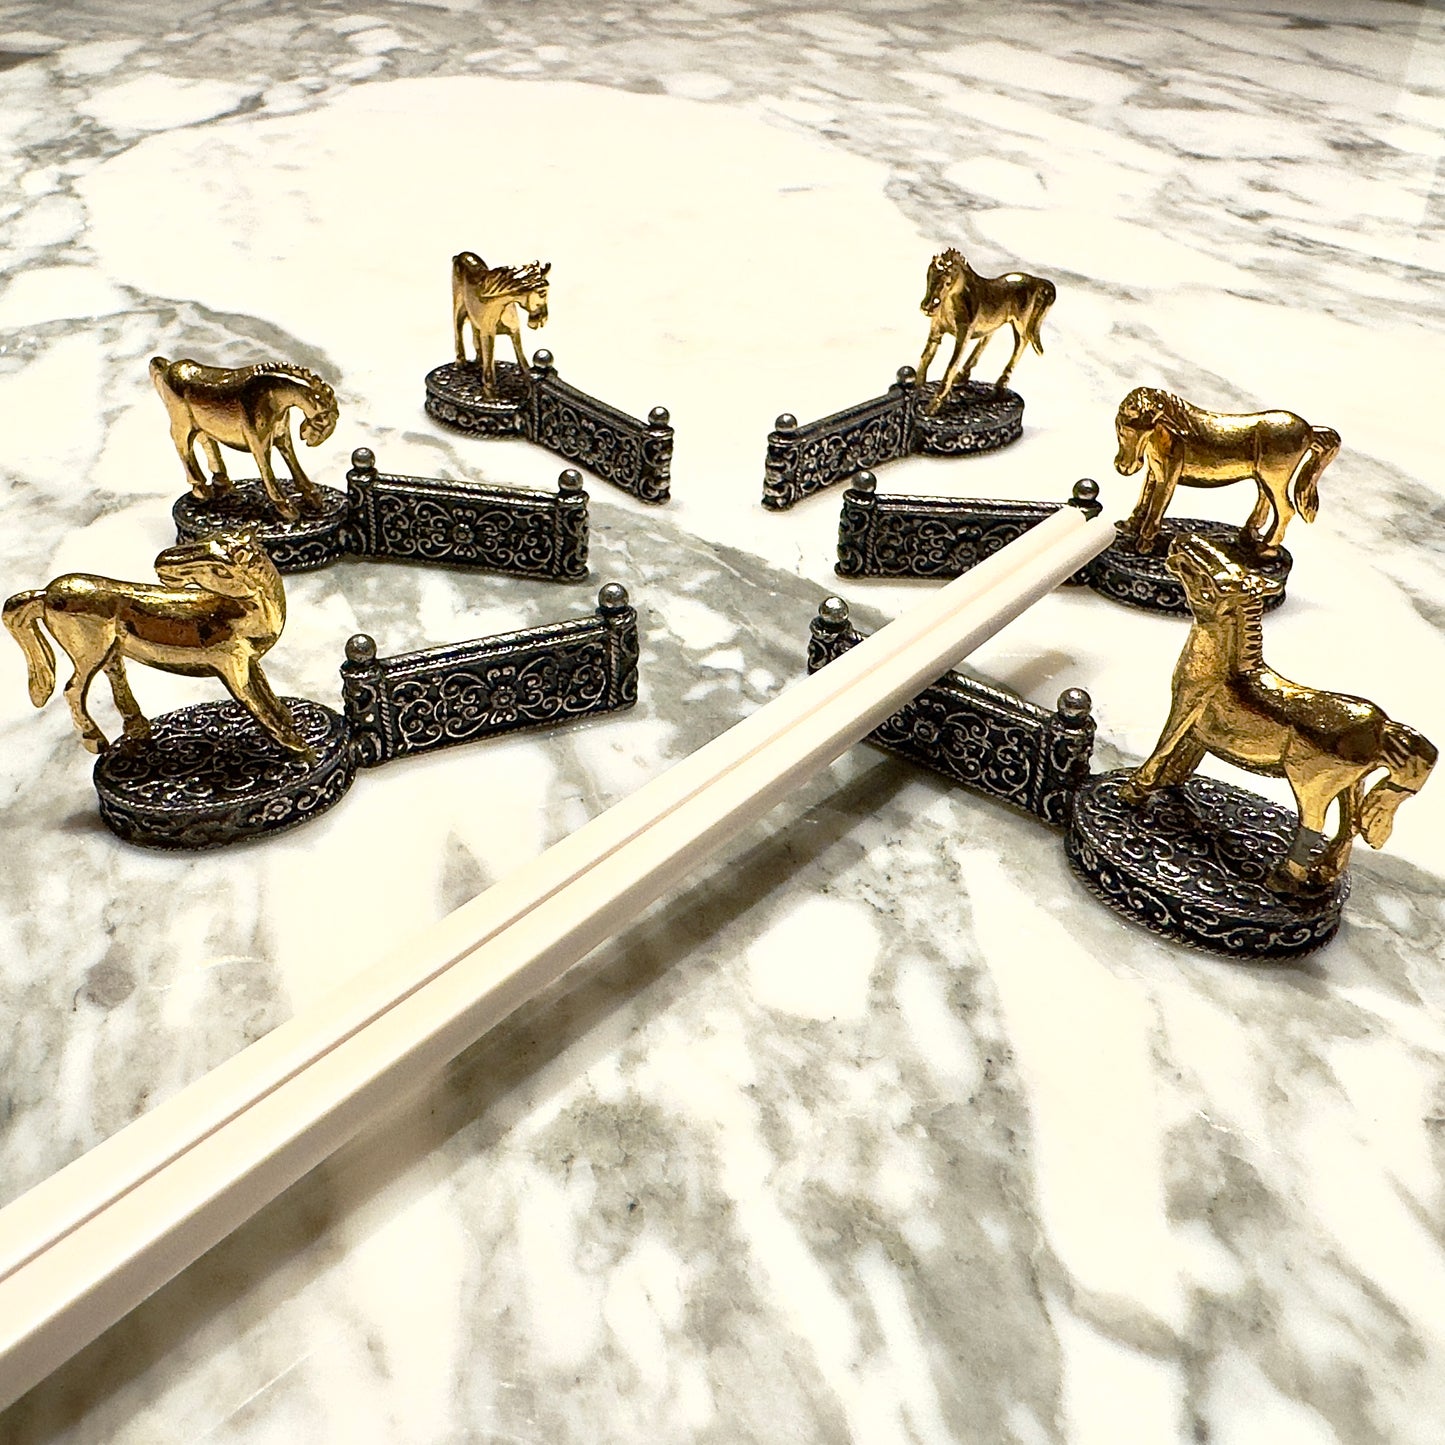 Vintage Set of Six Chopstick Holders / Cutlery Rests - Showjumping Horses